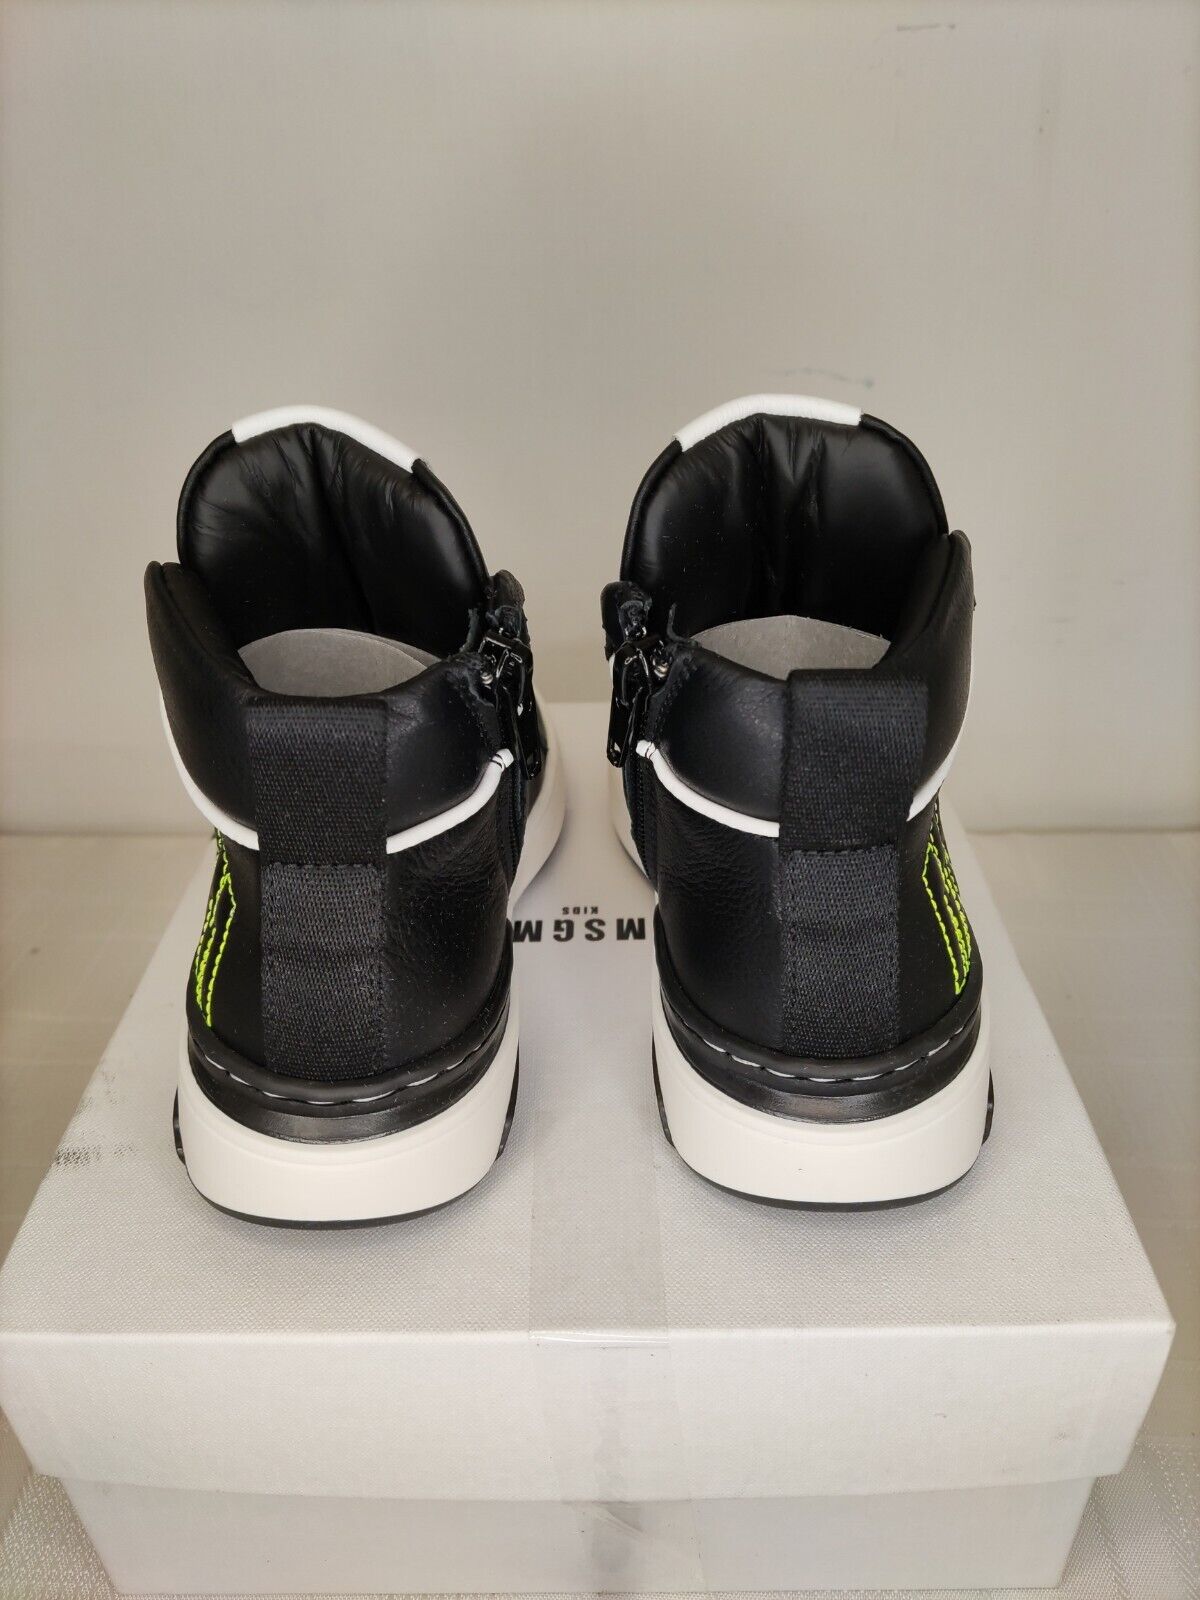 MSGM Kids. High Top Leather Trainers. Black. Kids Size.****RefVS1